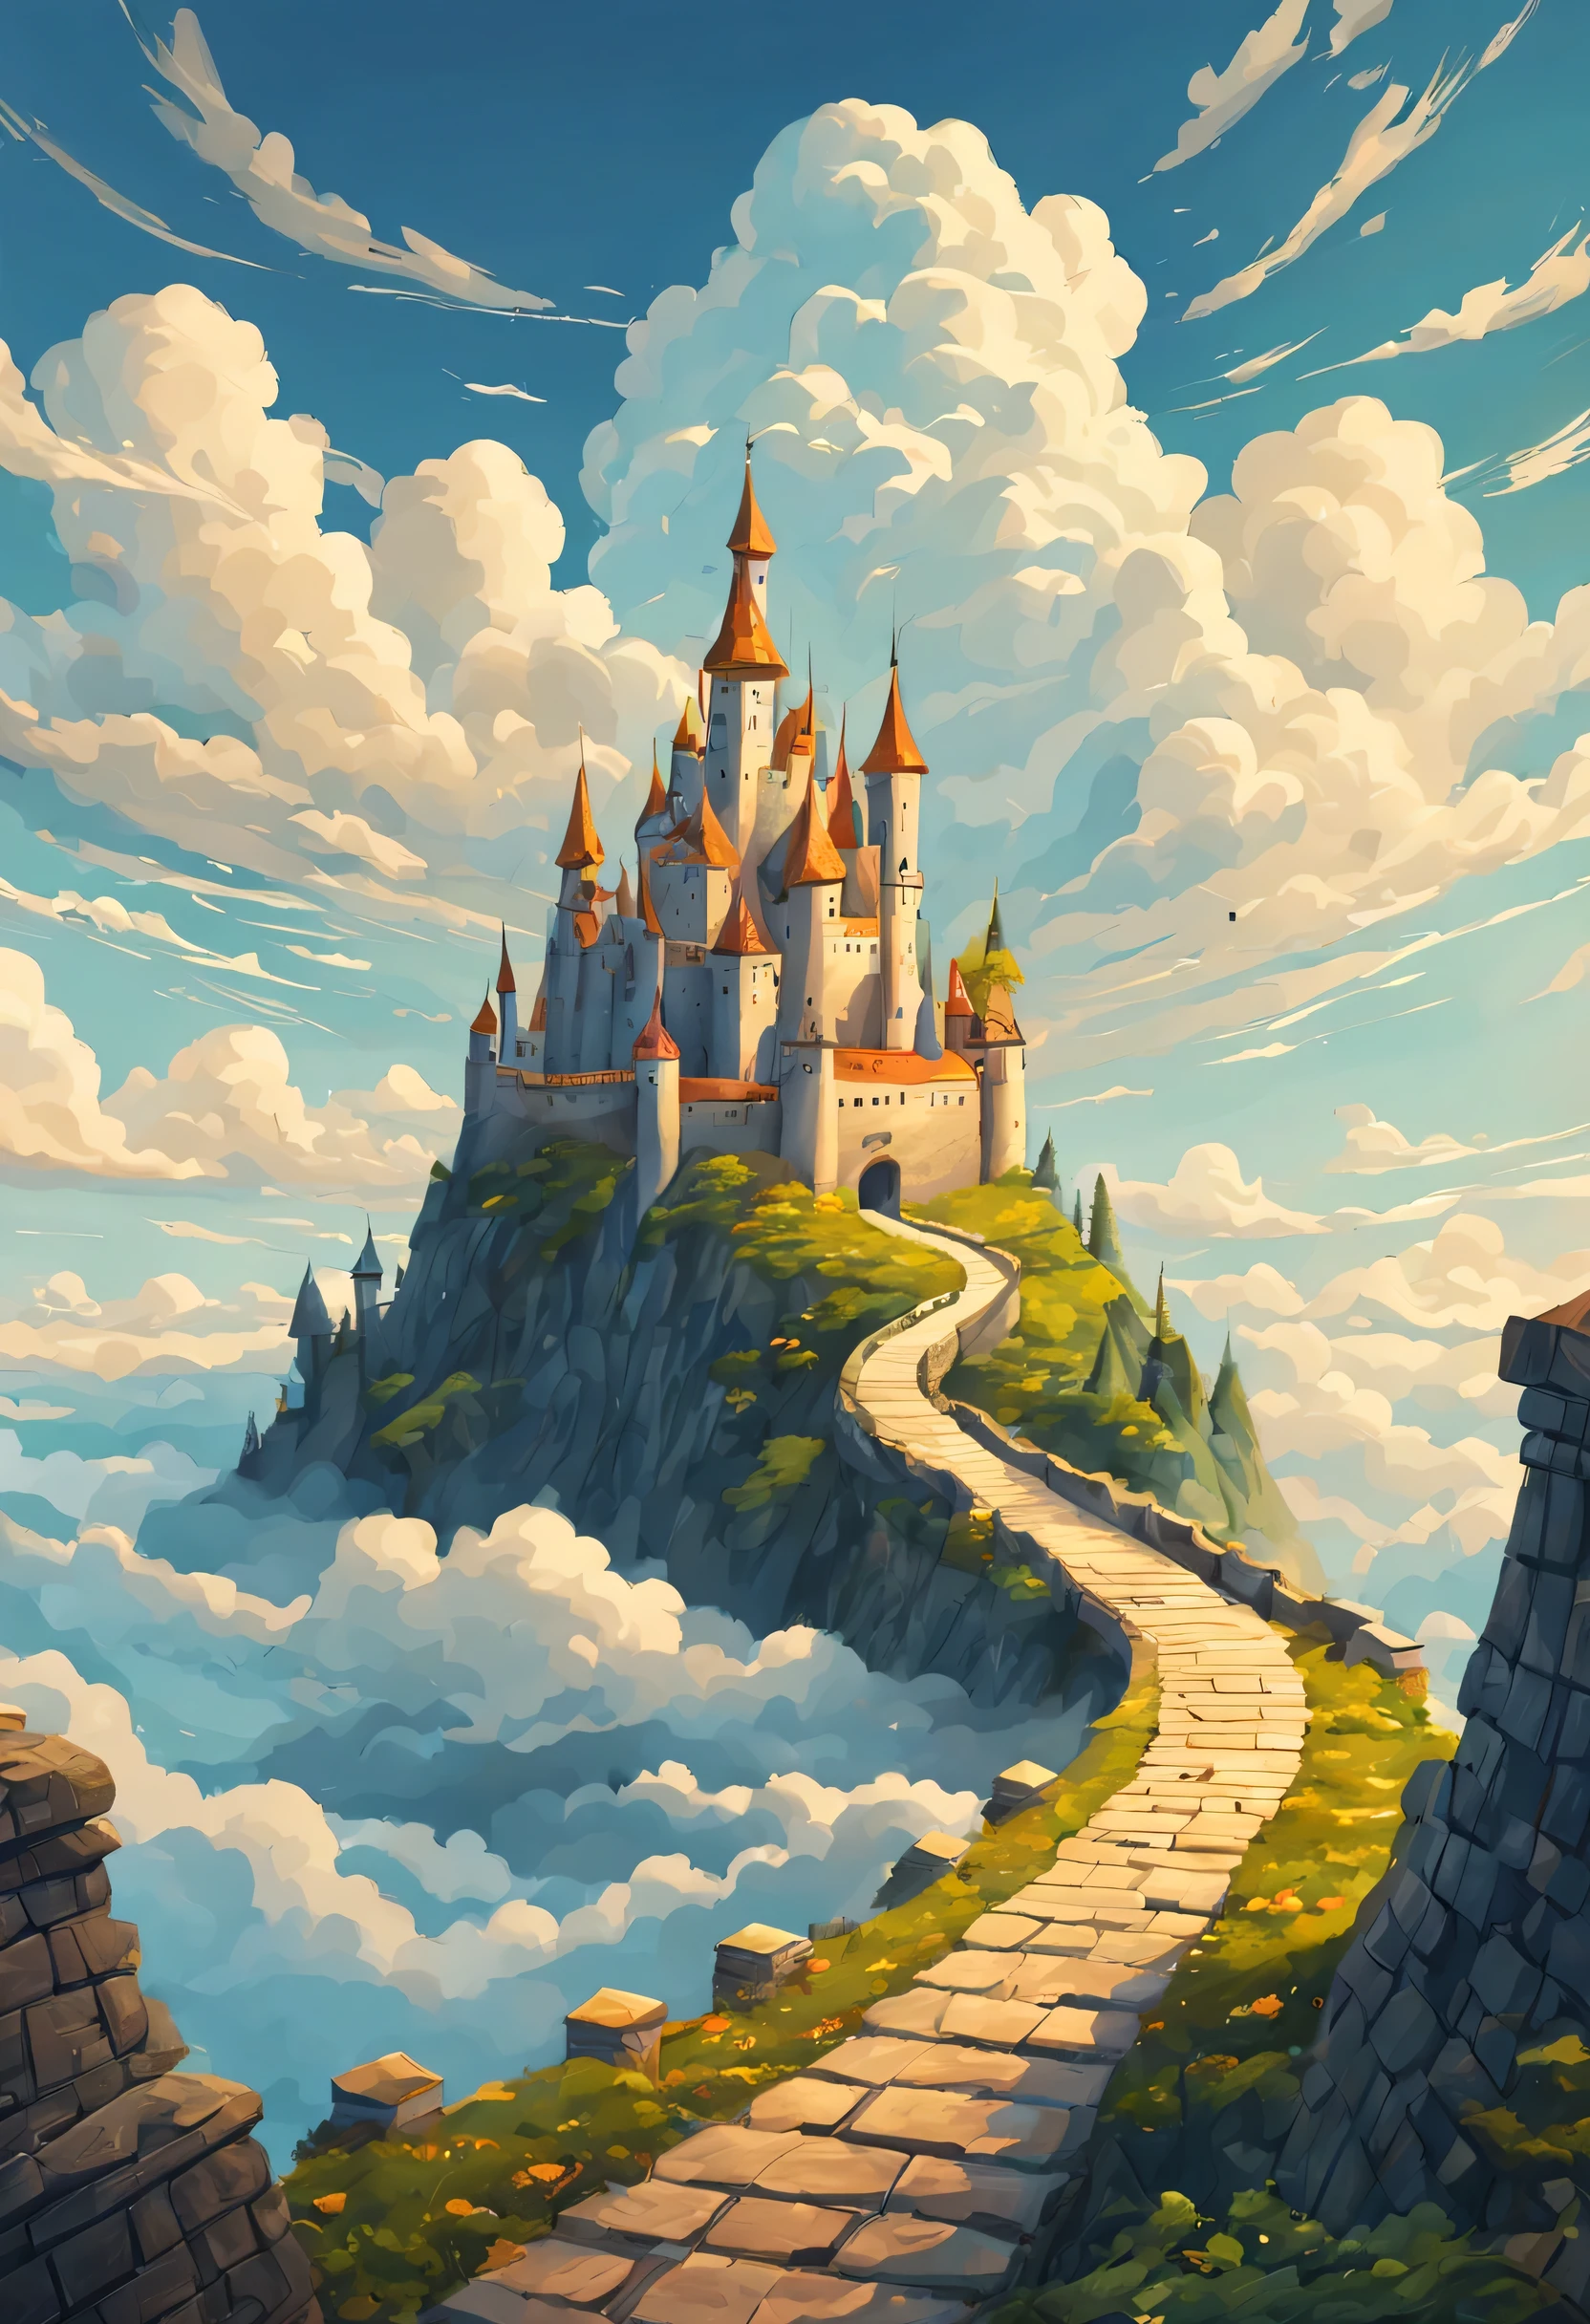 Fantasy, book illustration, endless clouds, a castle with golden roofs flew in the clouds, stone road leads to the sky